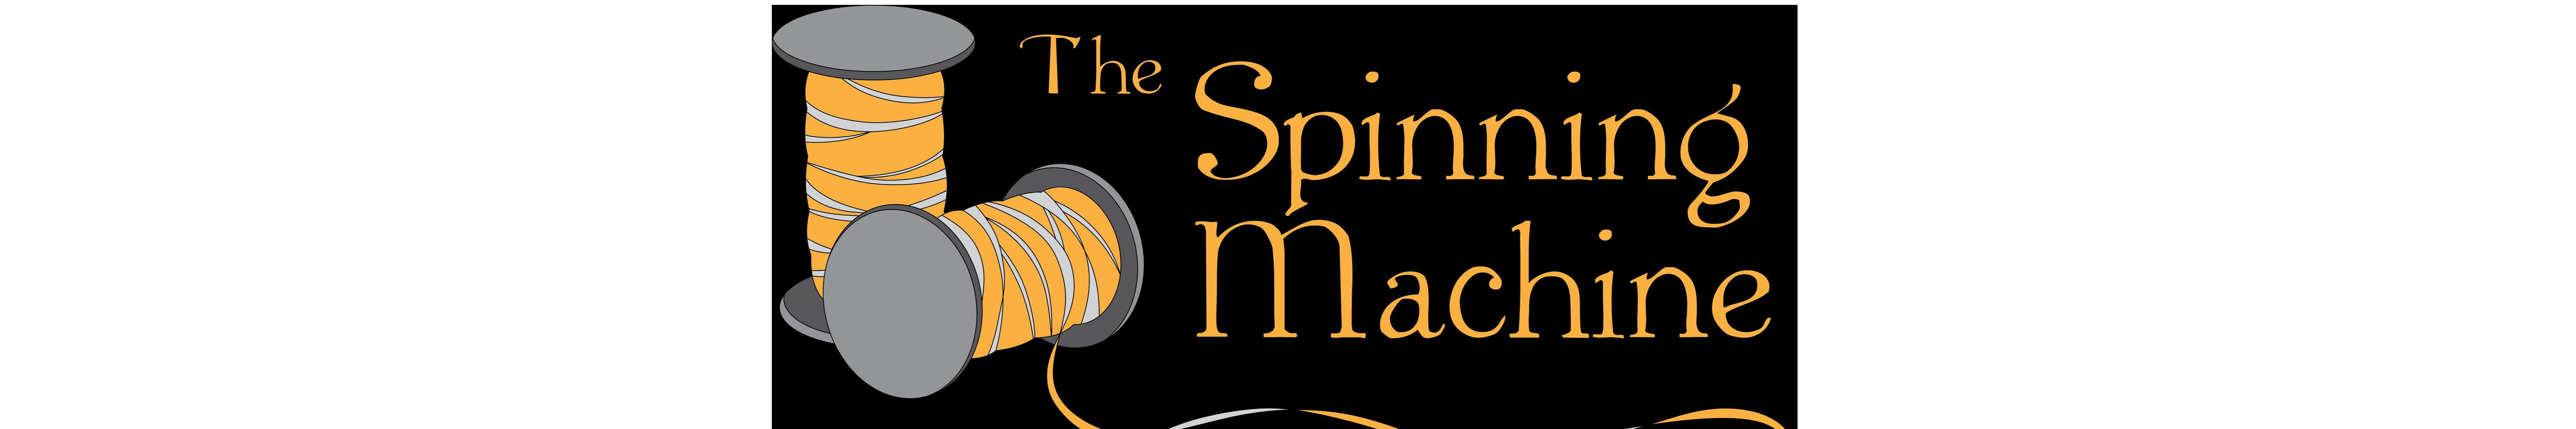 The Spinning Machine Exclusive Bedding and Textiles